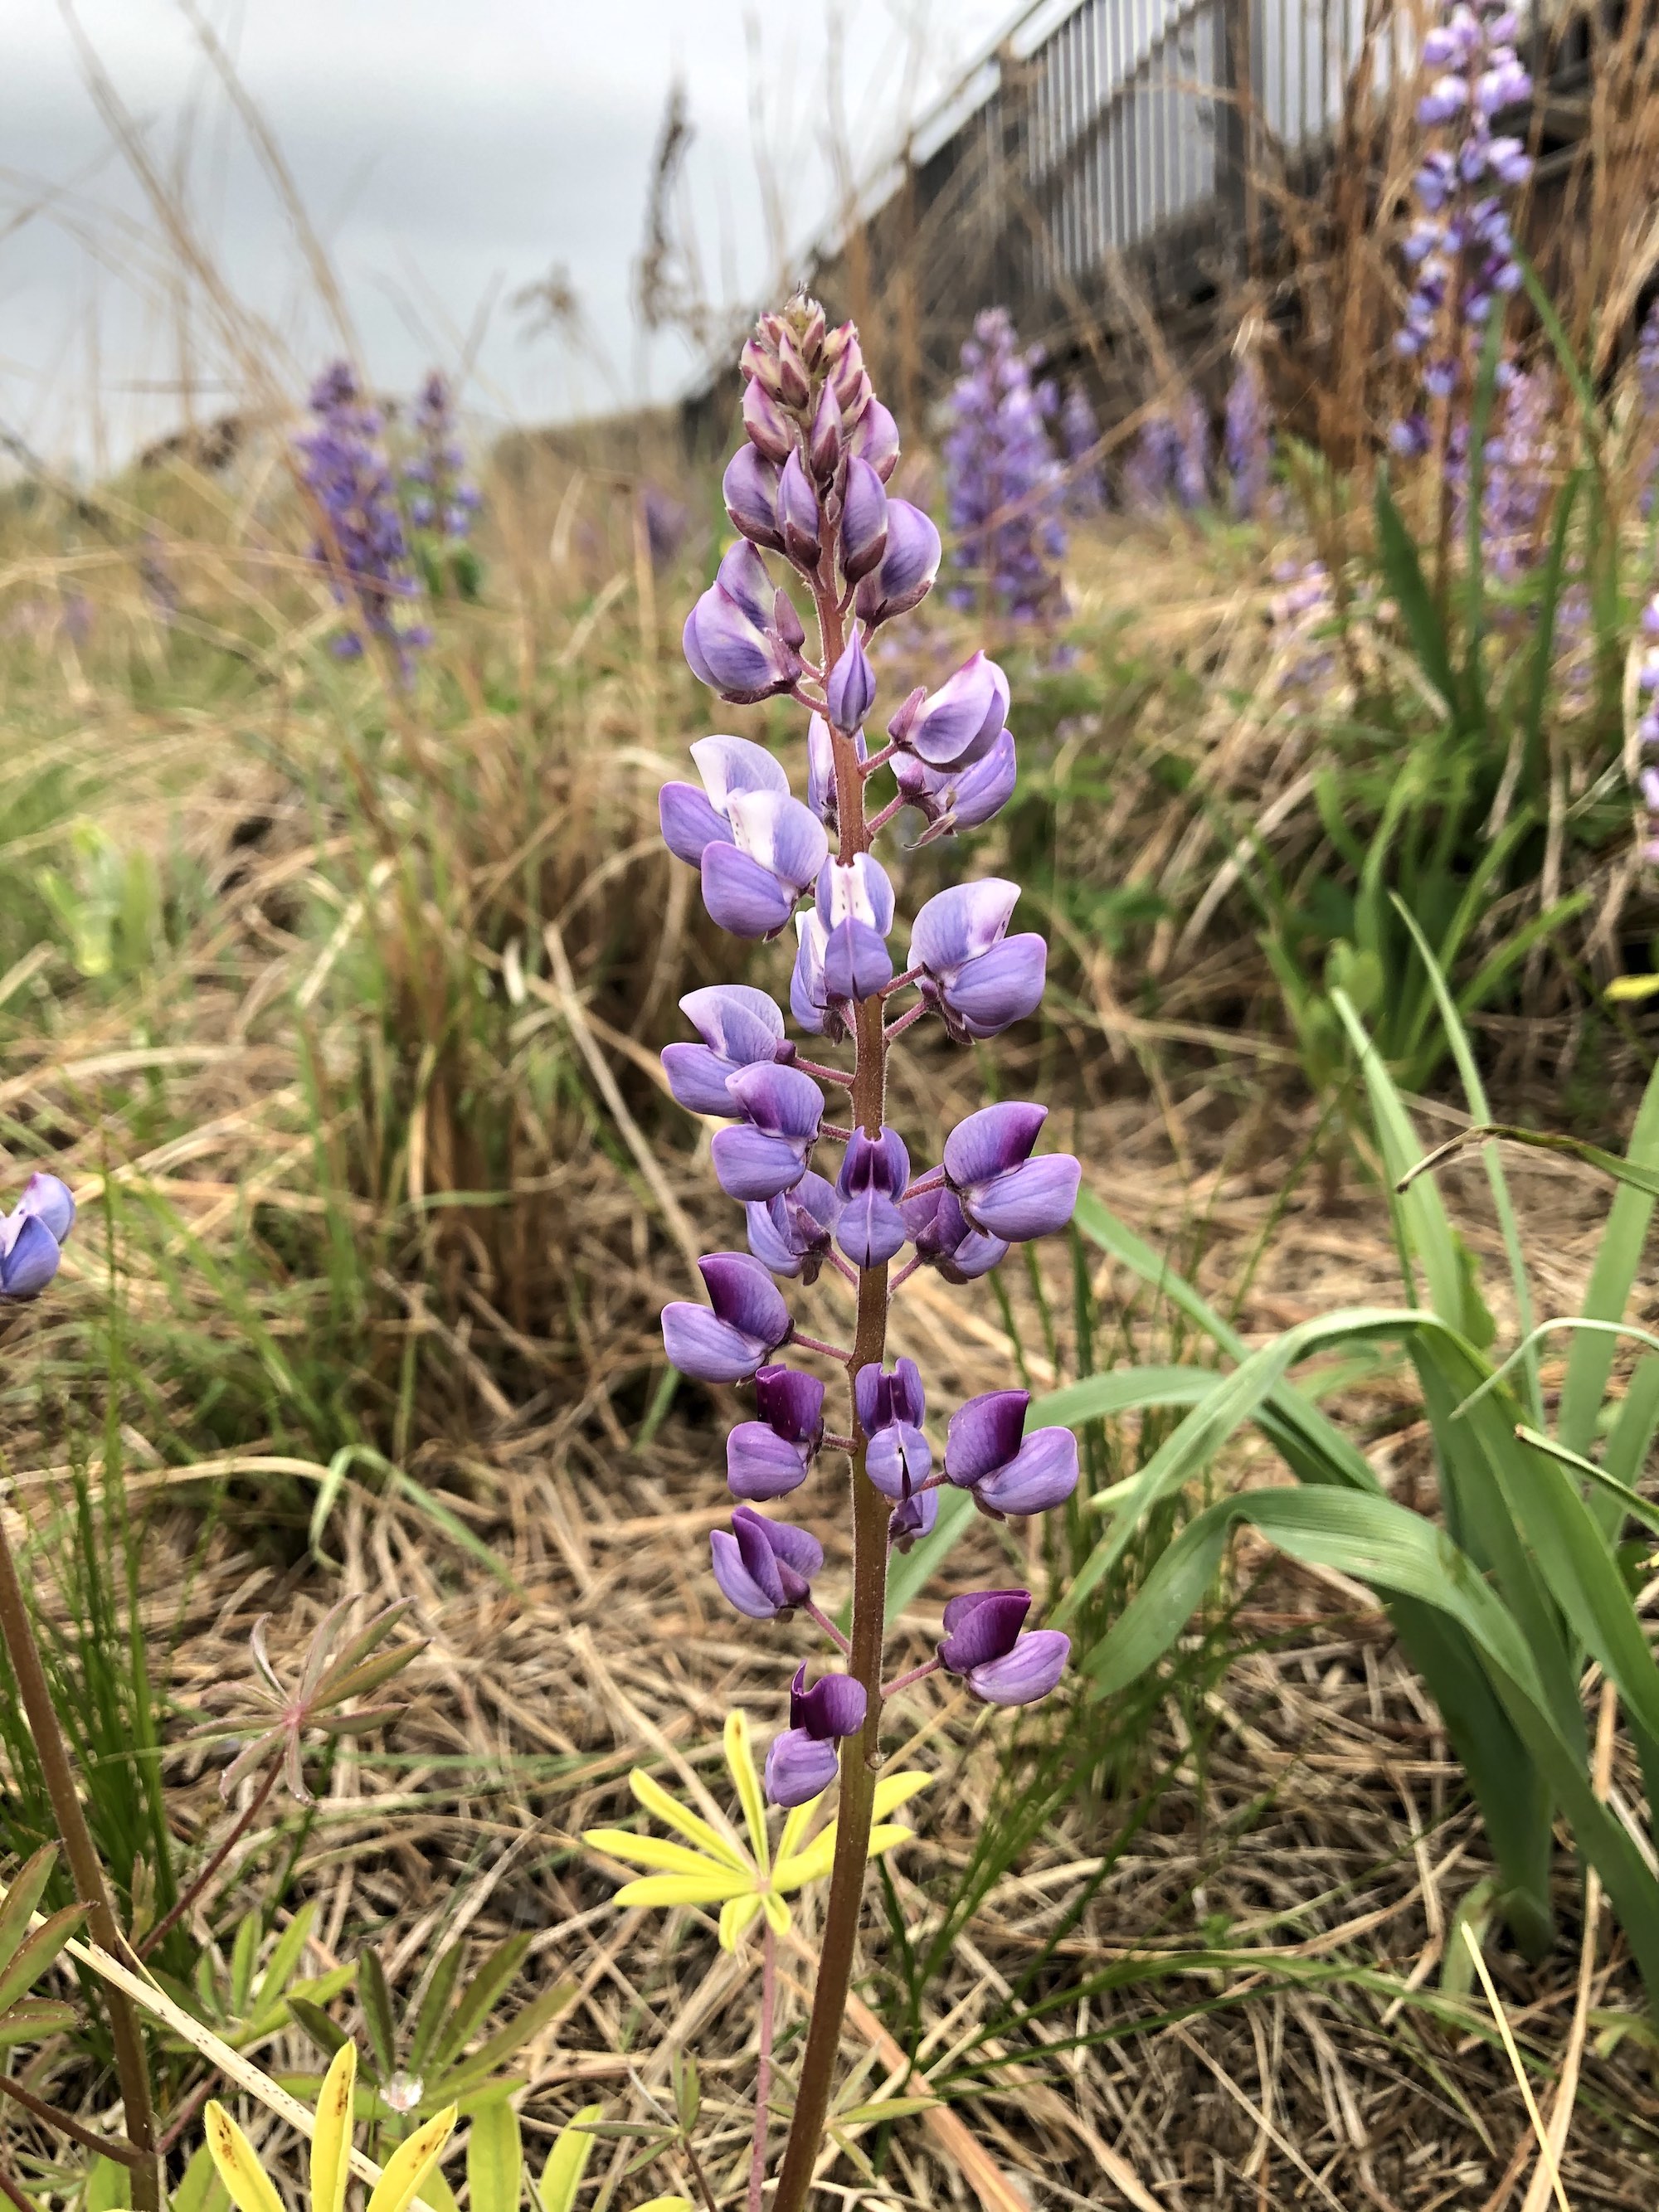 Wild Lupine next to the UW-Madison Arboretum Visitor Center in Madison, Wisconsin on May 15, 2021.